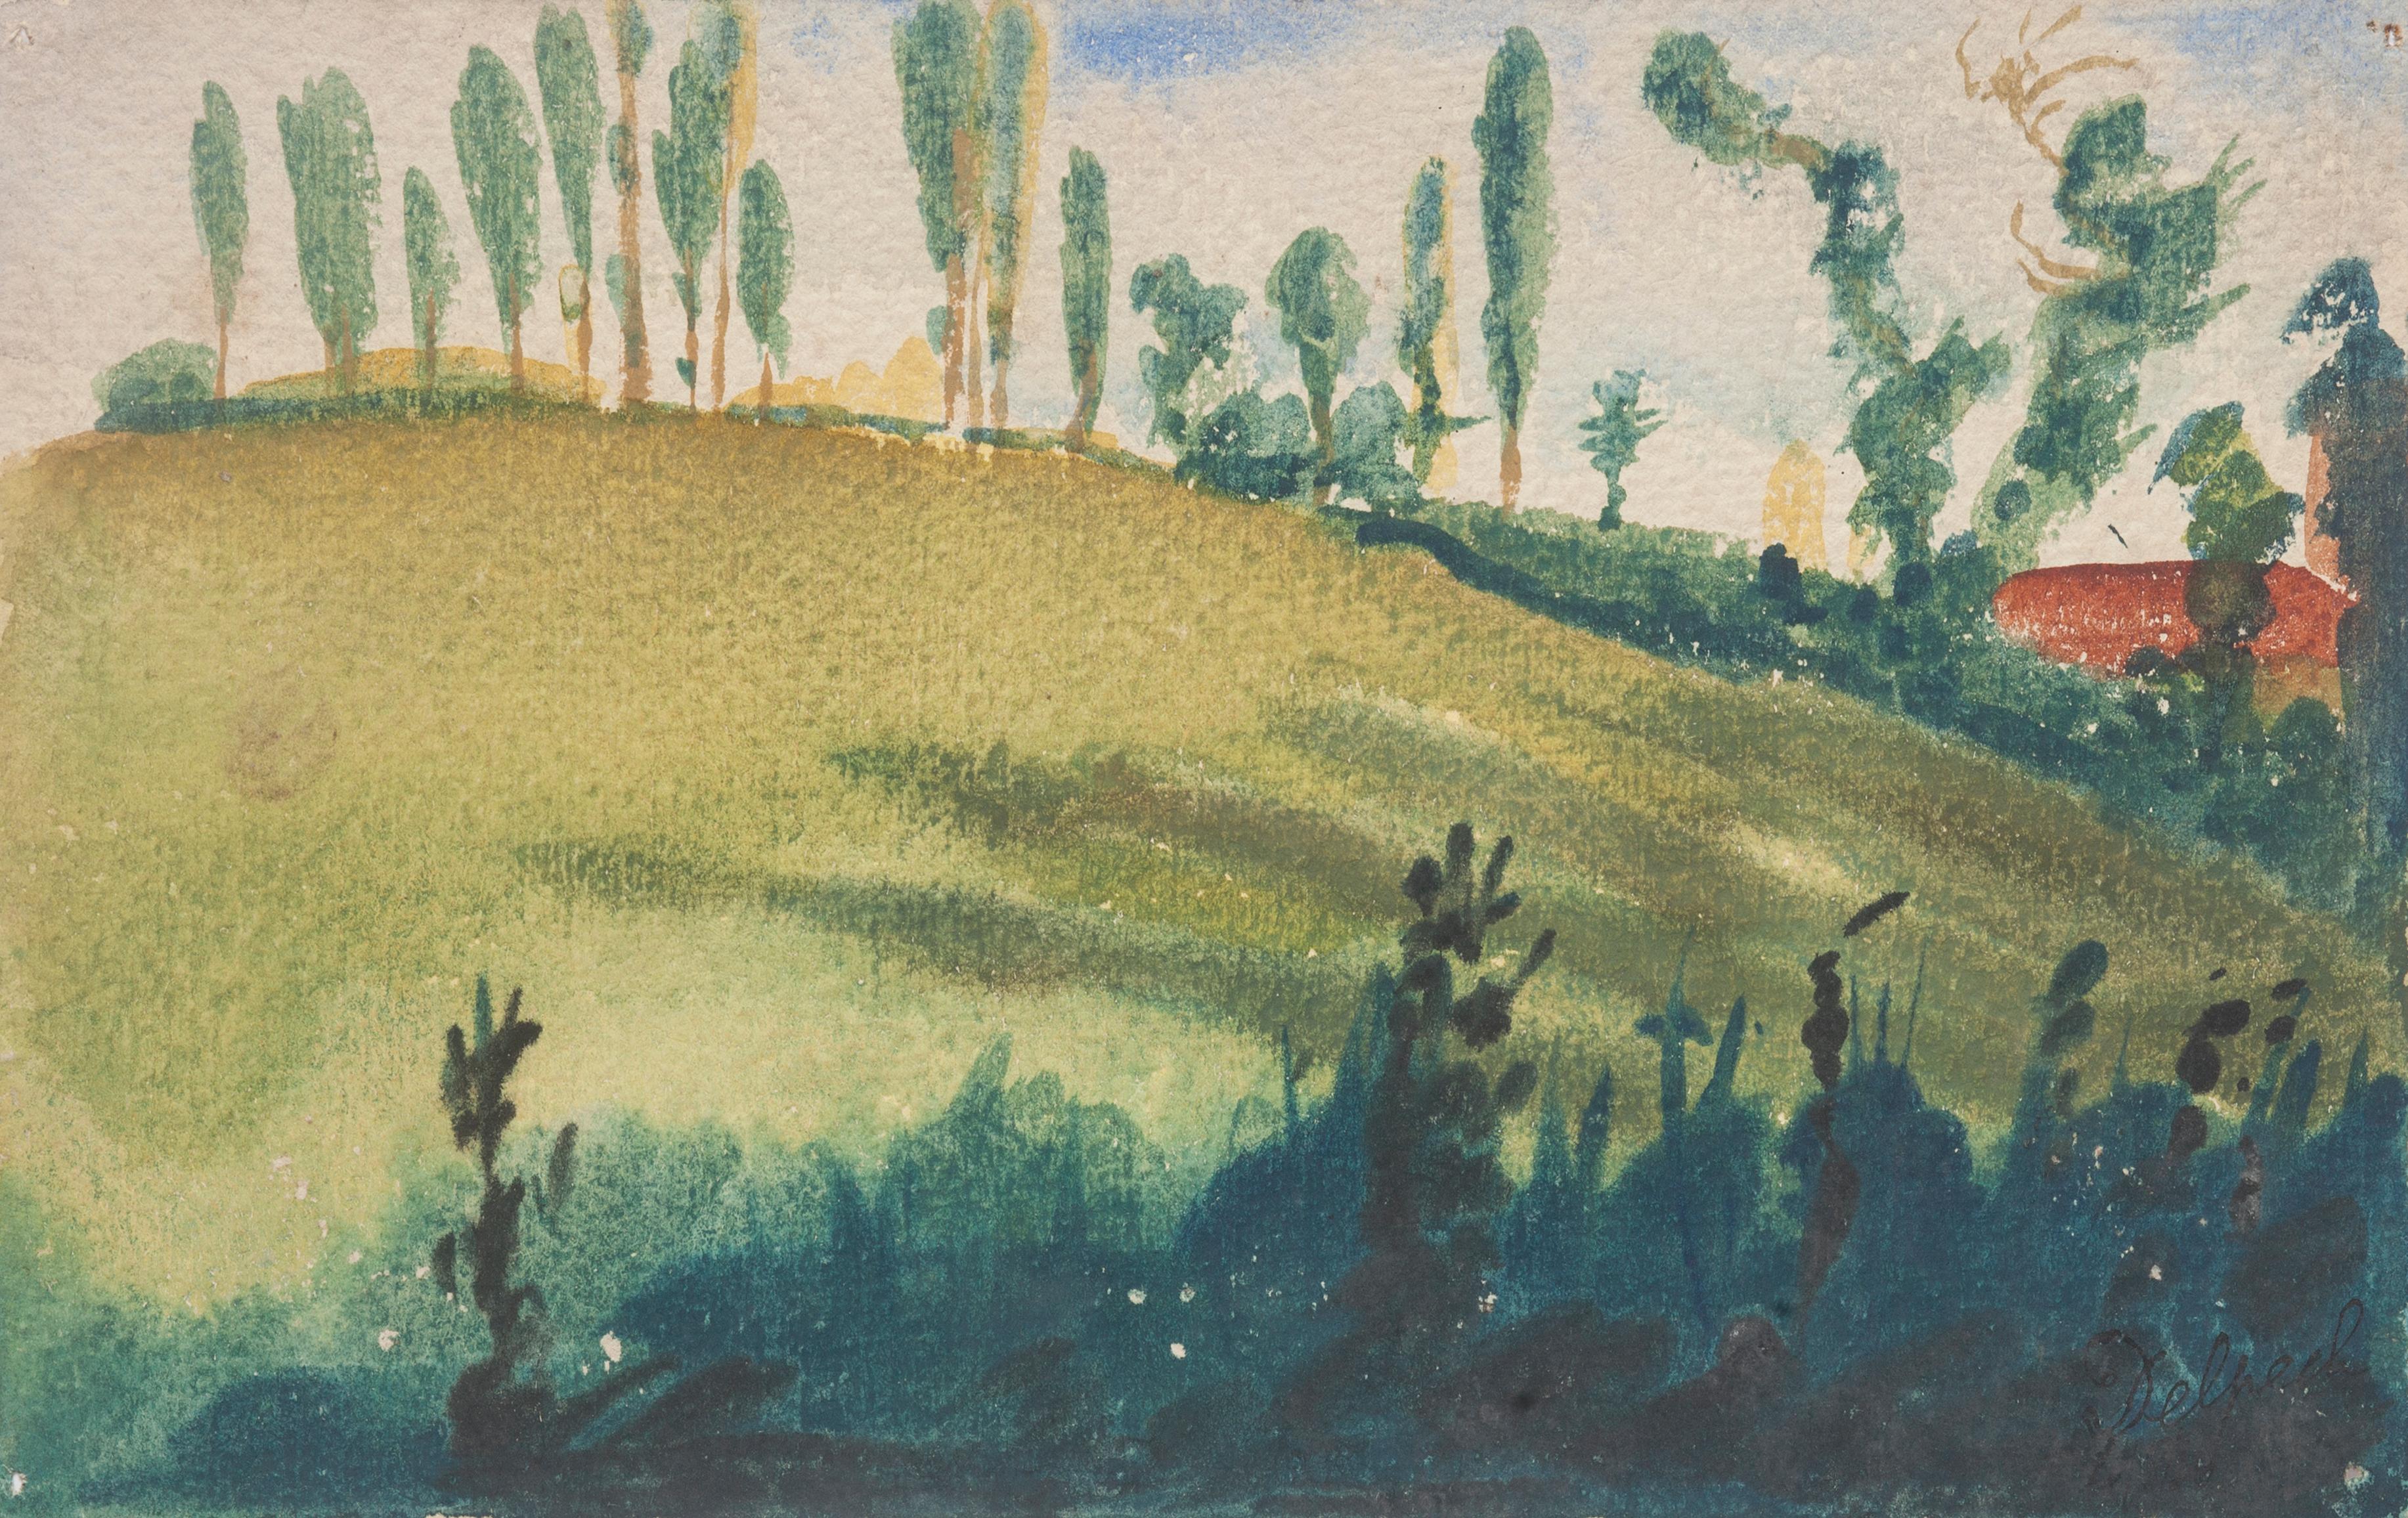 "Landscape" (1940) is an original drawing in watercolor on paper, realized by Jean Delpech (1916-1988). 
The state of preservation of the artwork is very good. Signed in pen lower right.

Sheet dimension: 15 x 23.4 cm.

The artwork represents